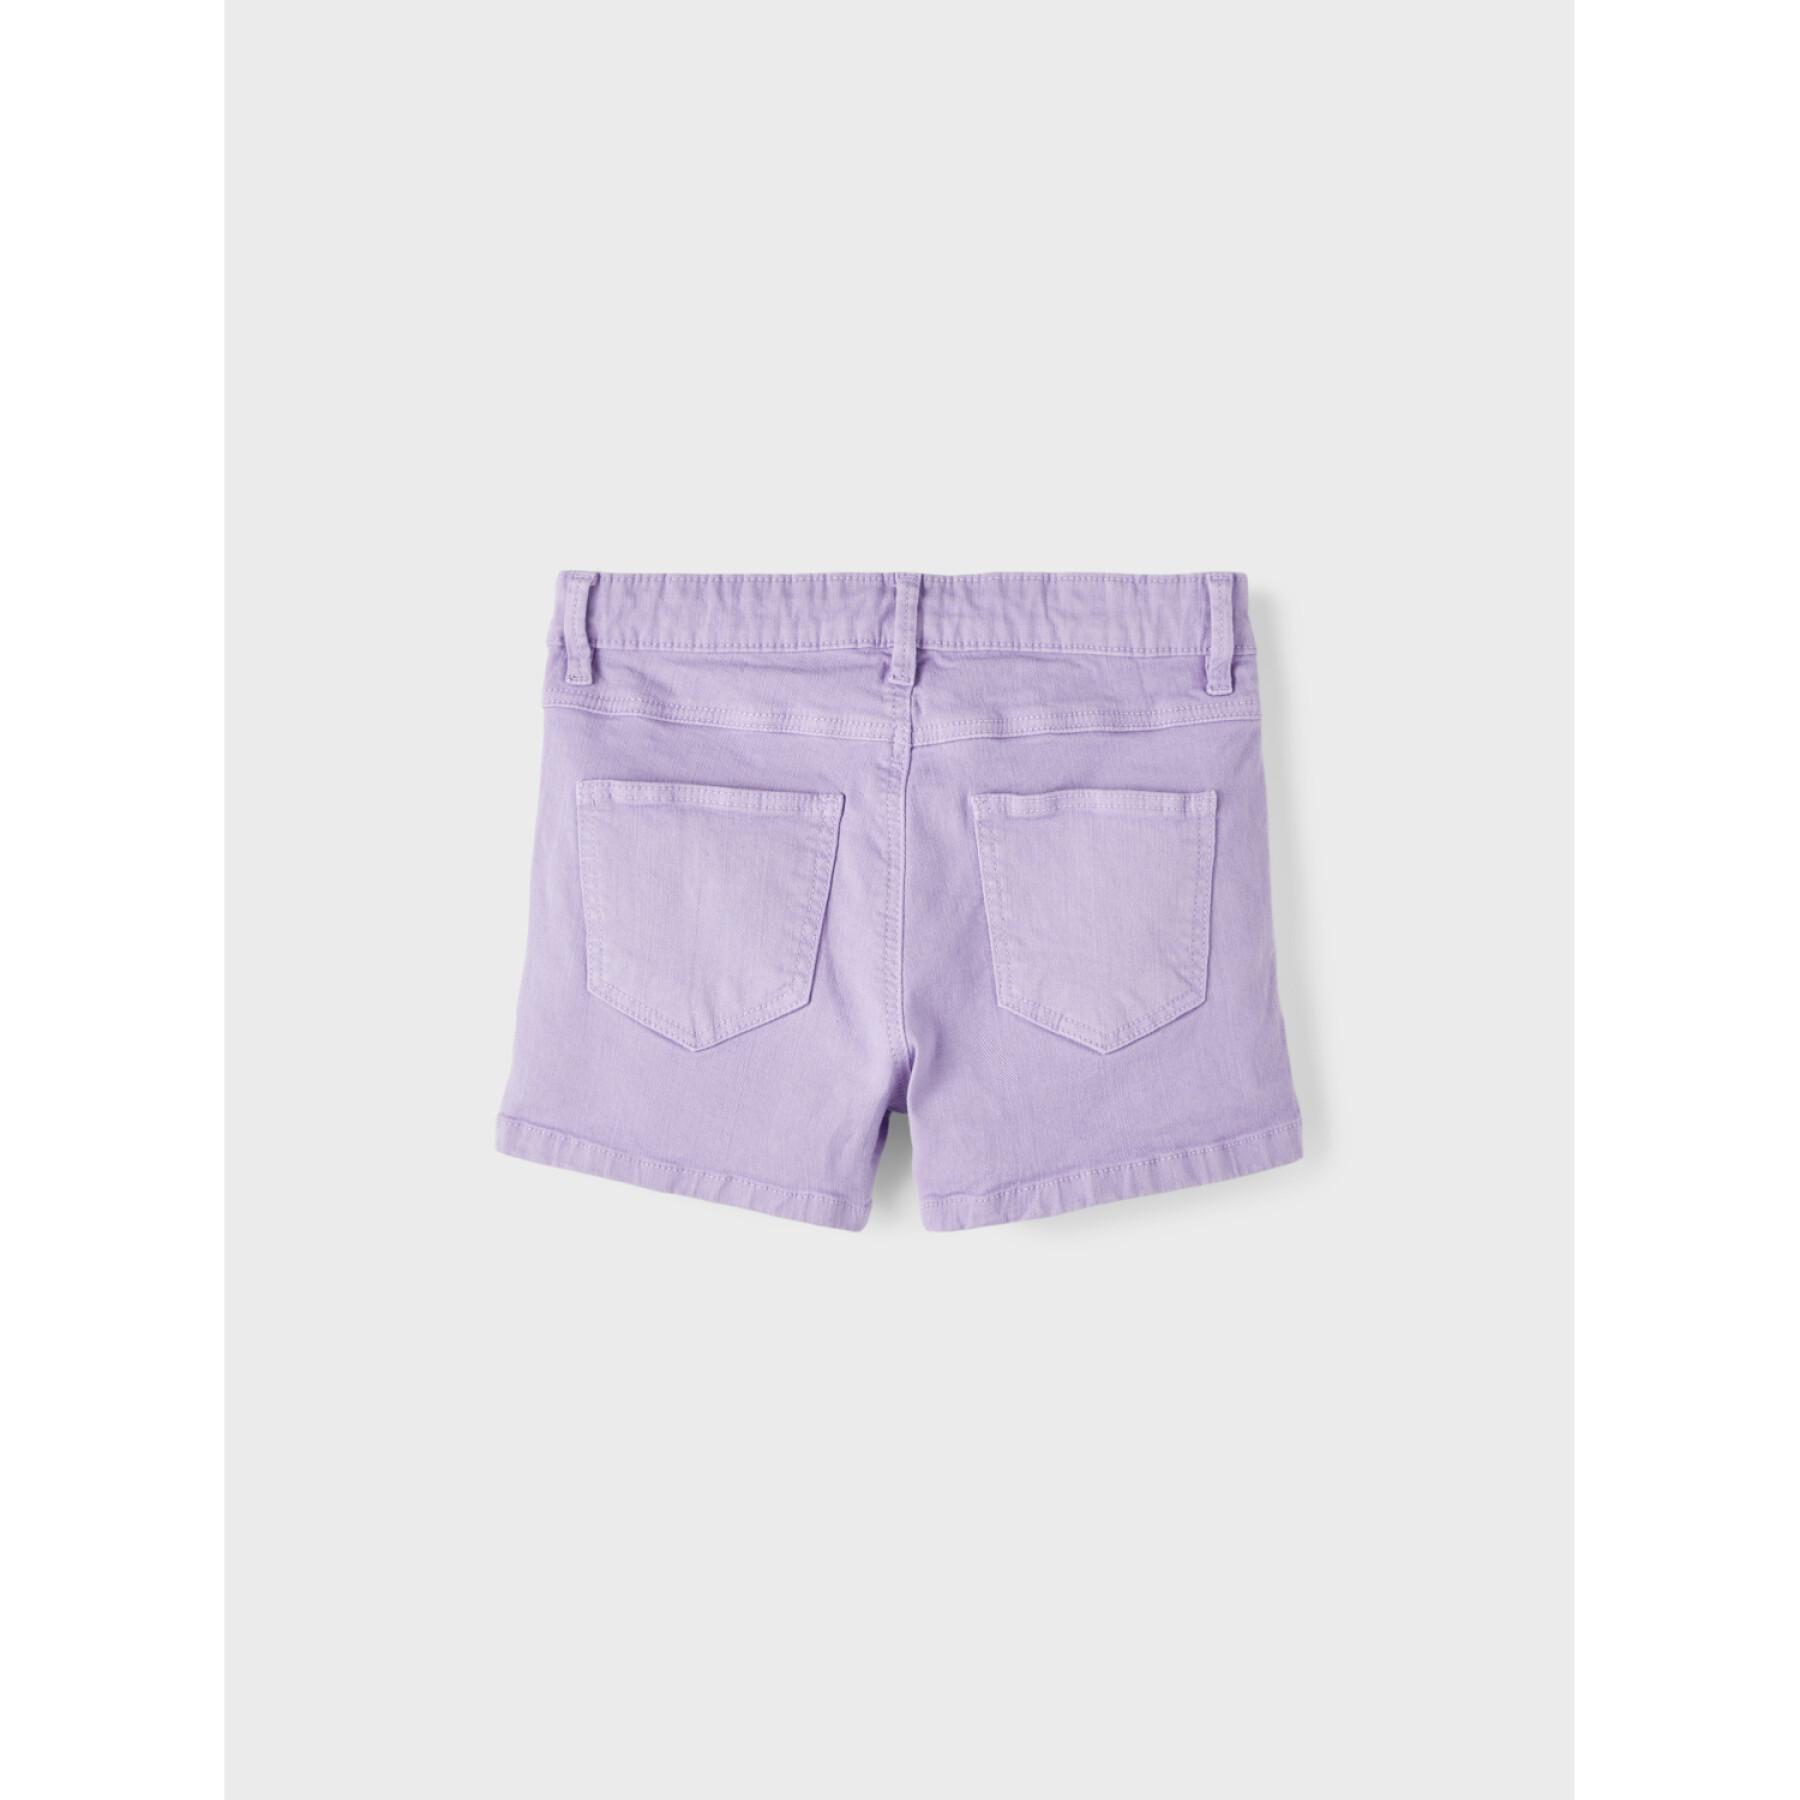 Girl's twill shorts Name it 8212-TP